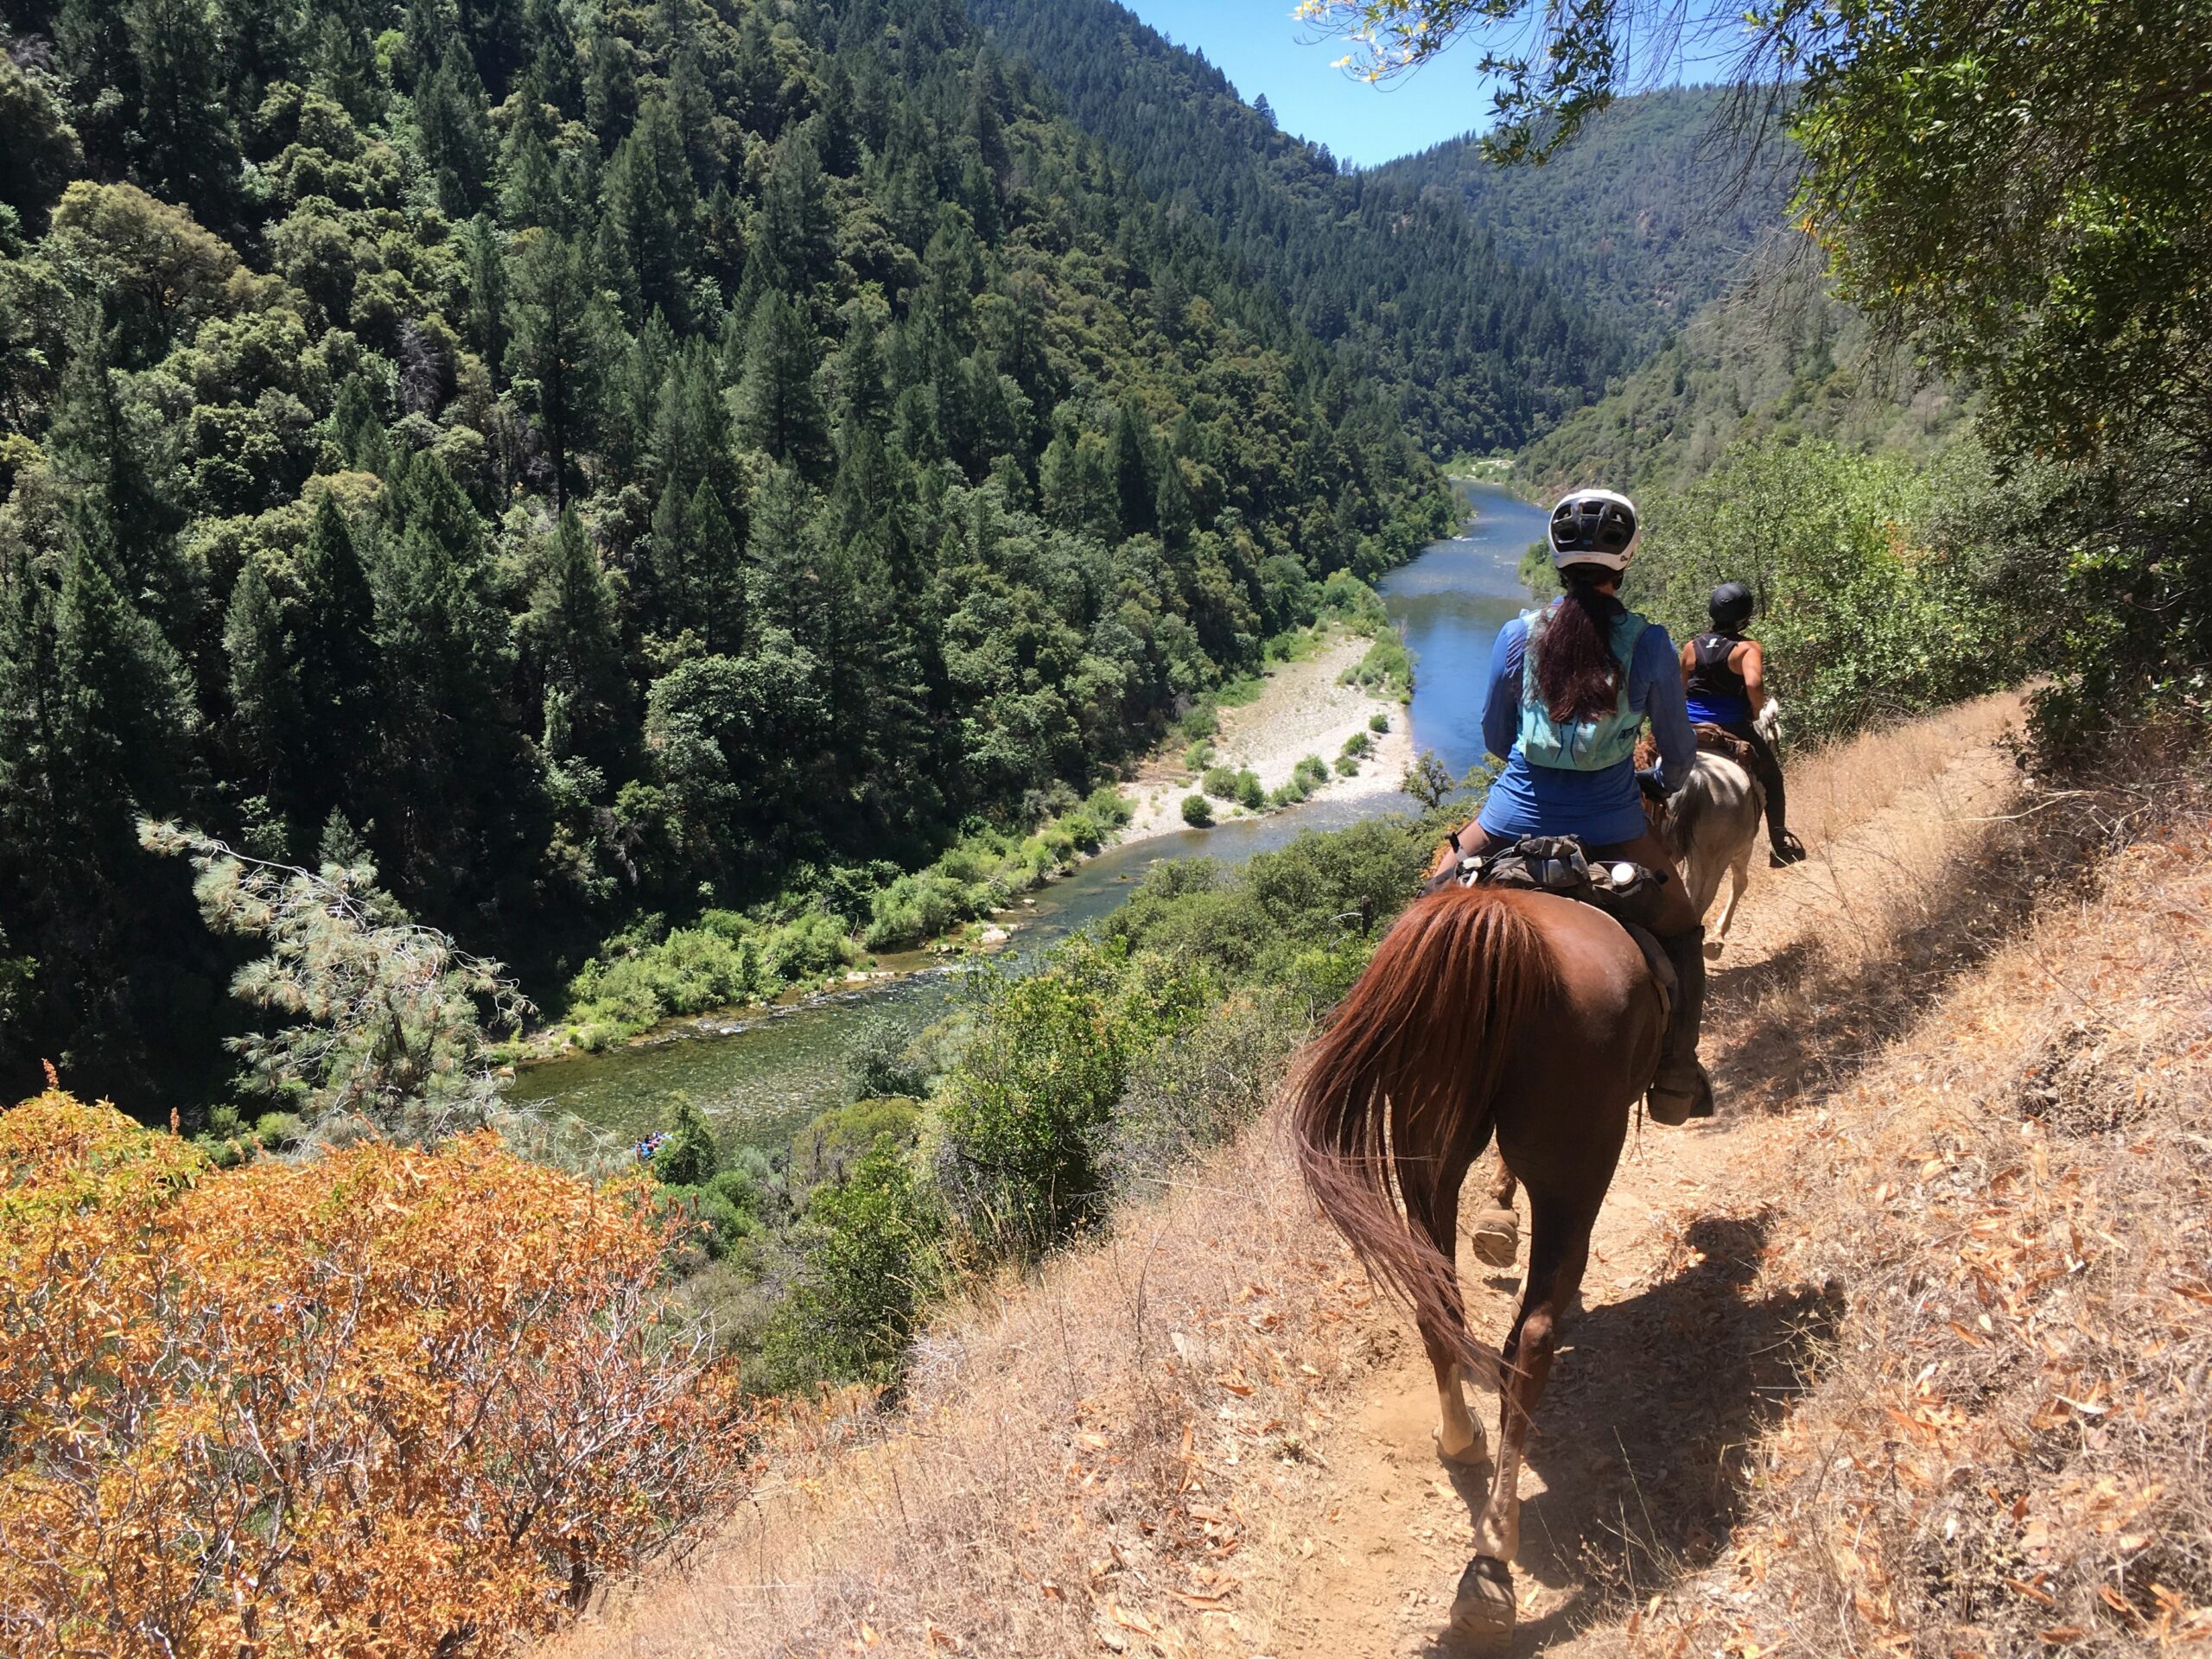 The California Loop, high above the American River, Day 2 - Ed Ride 2019.